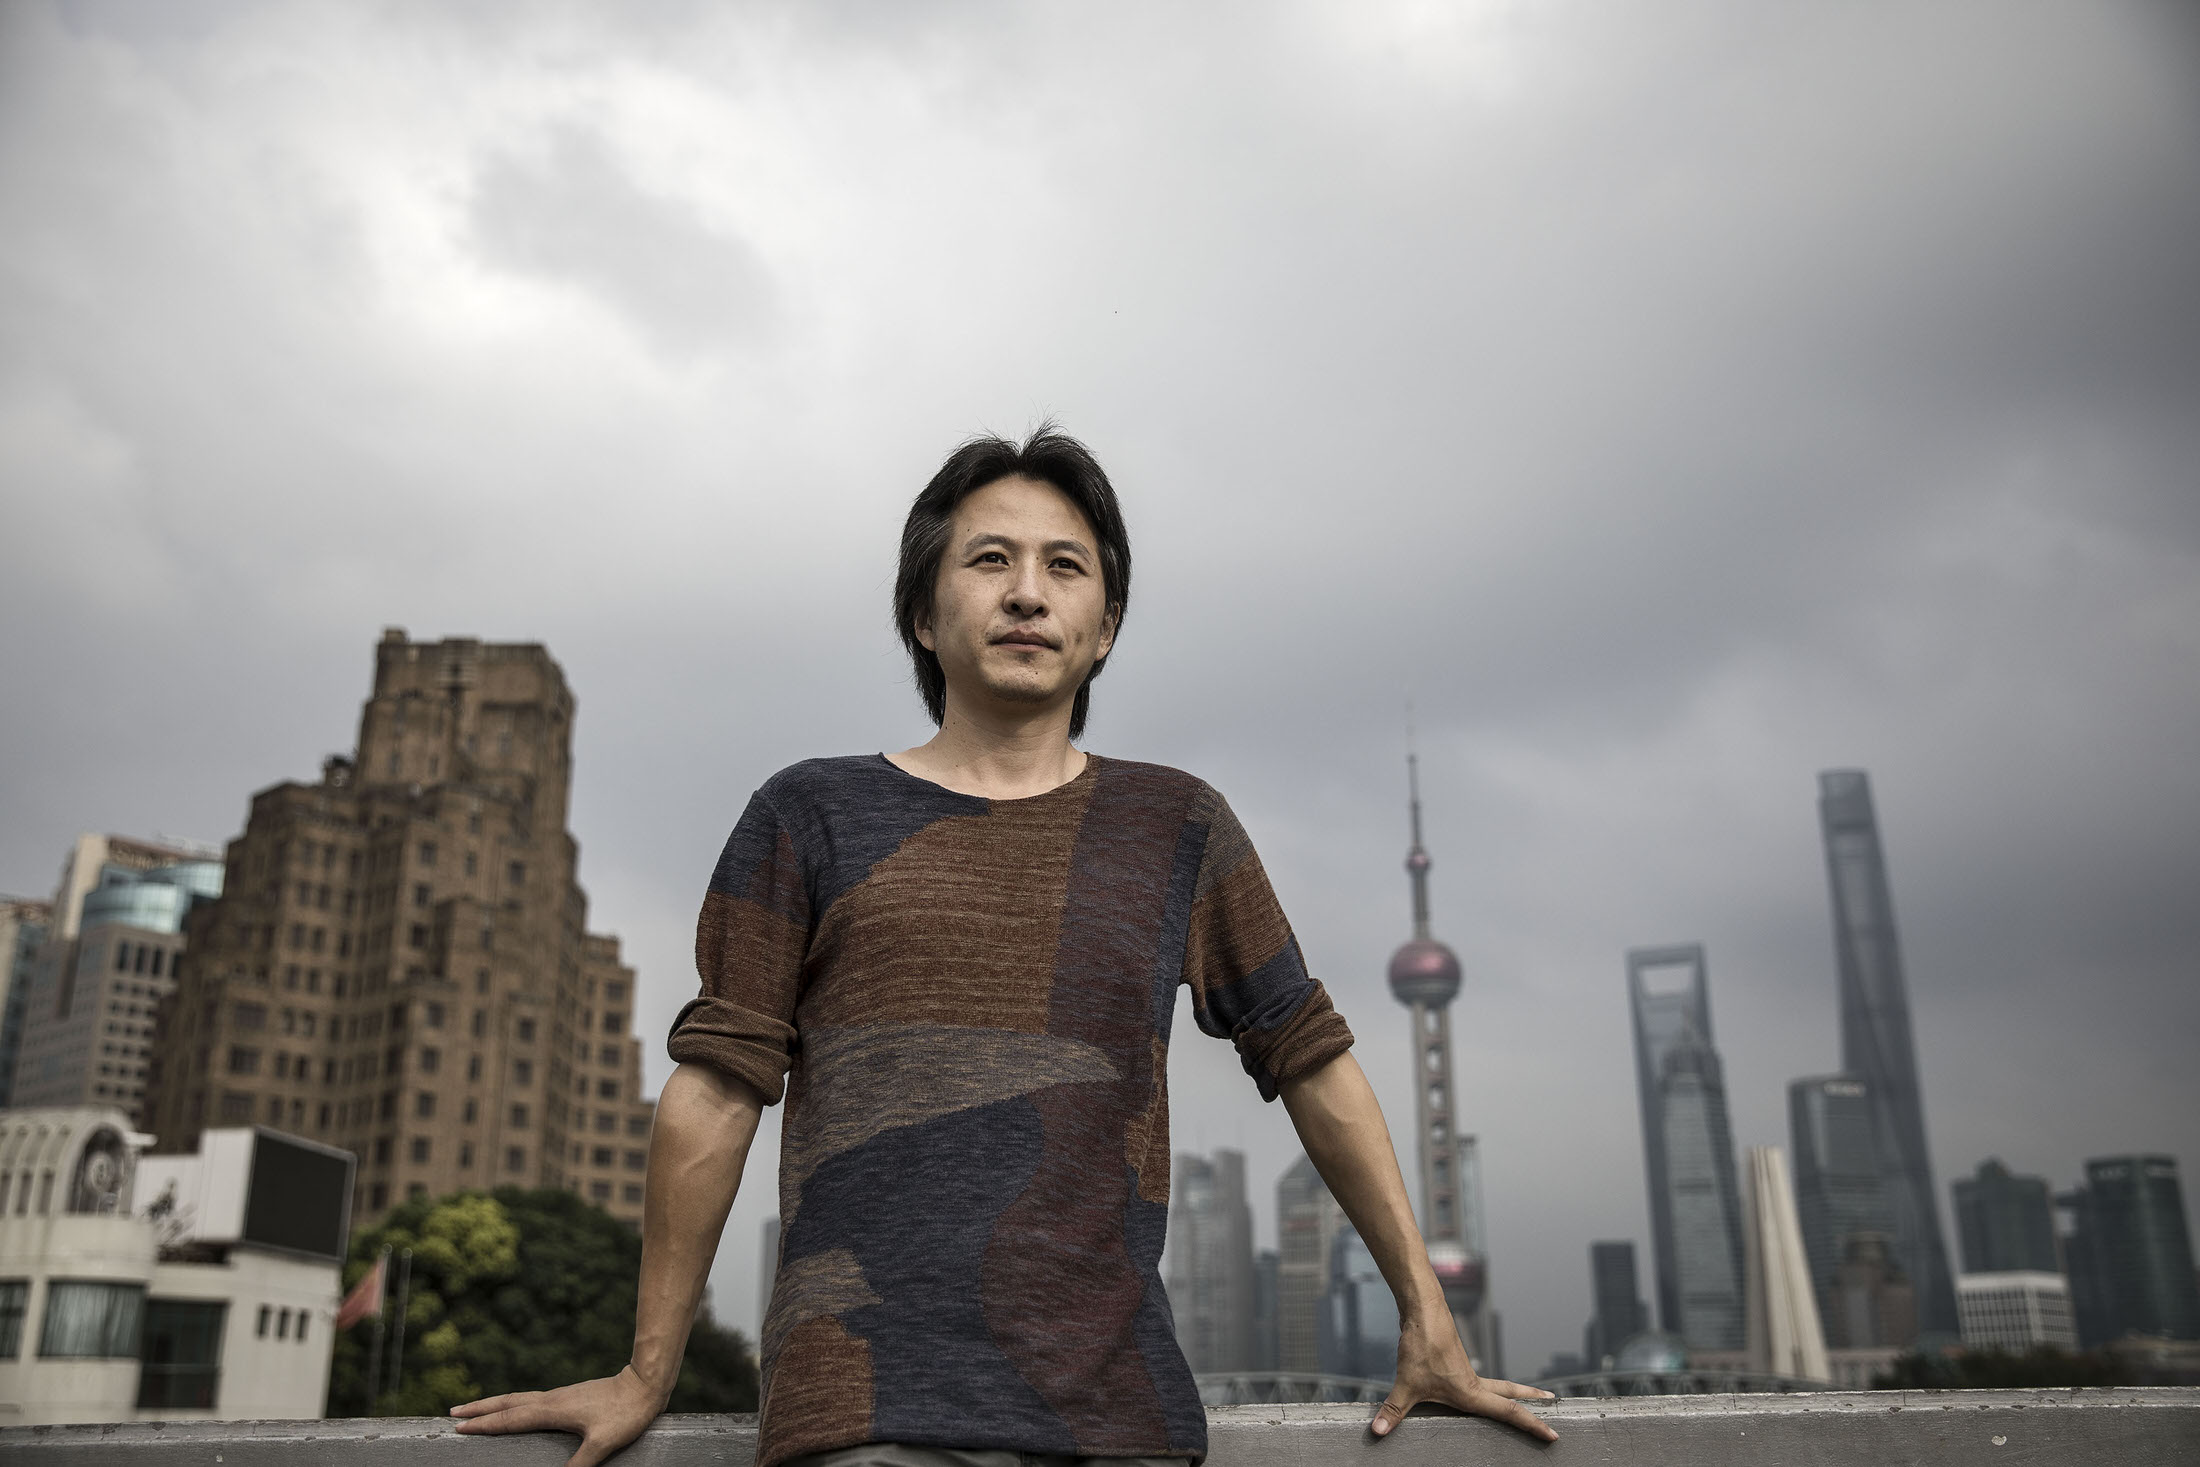 Alex Zhu, founder of Musical.ly, poses for a photograph in Shanghai, China, on Saturday, Oct. 1, 2016. Photographer: Qilai Shen/Bloomberg